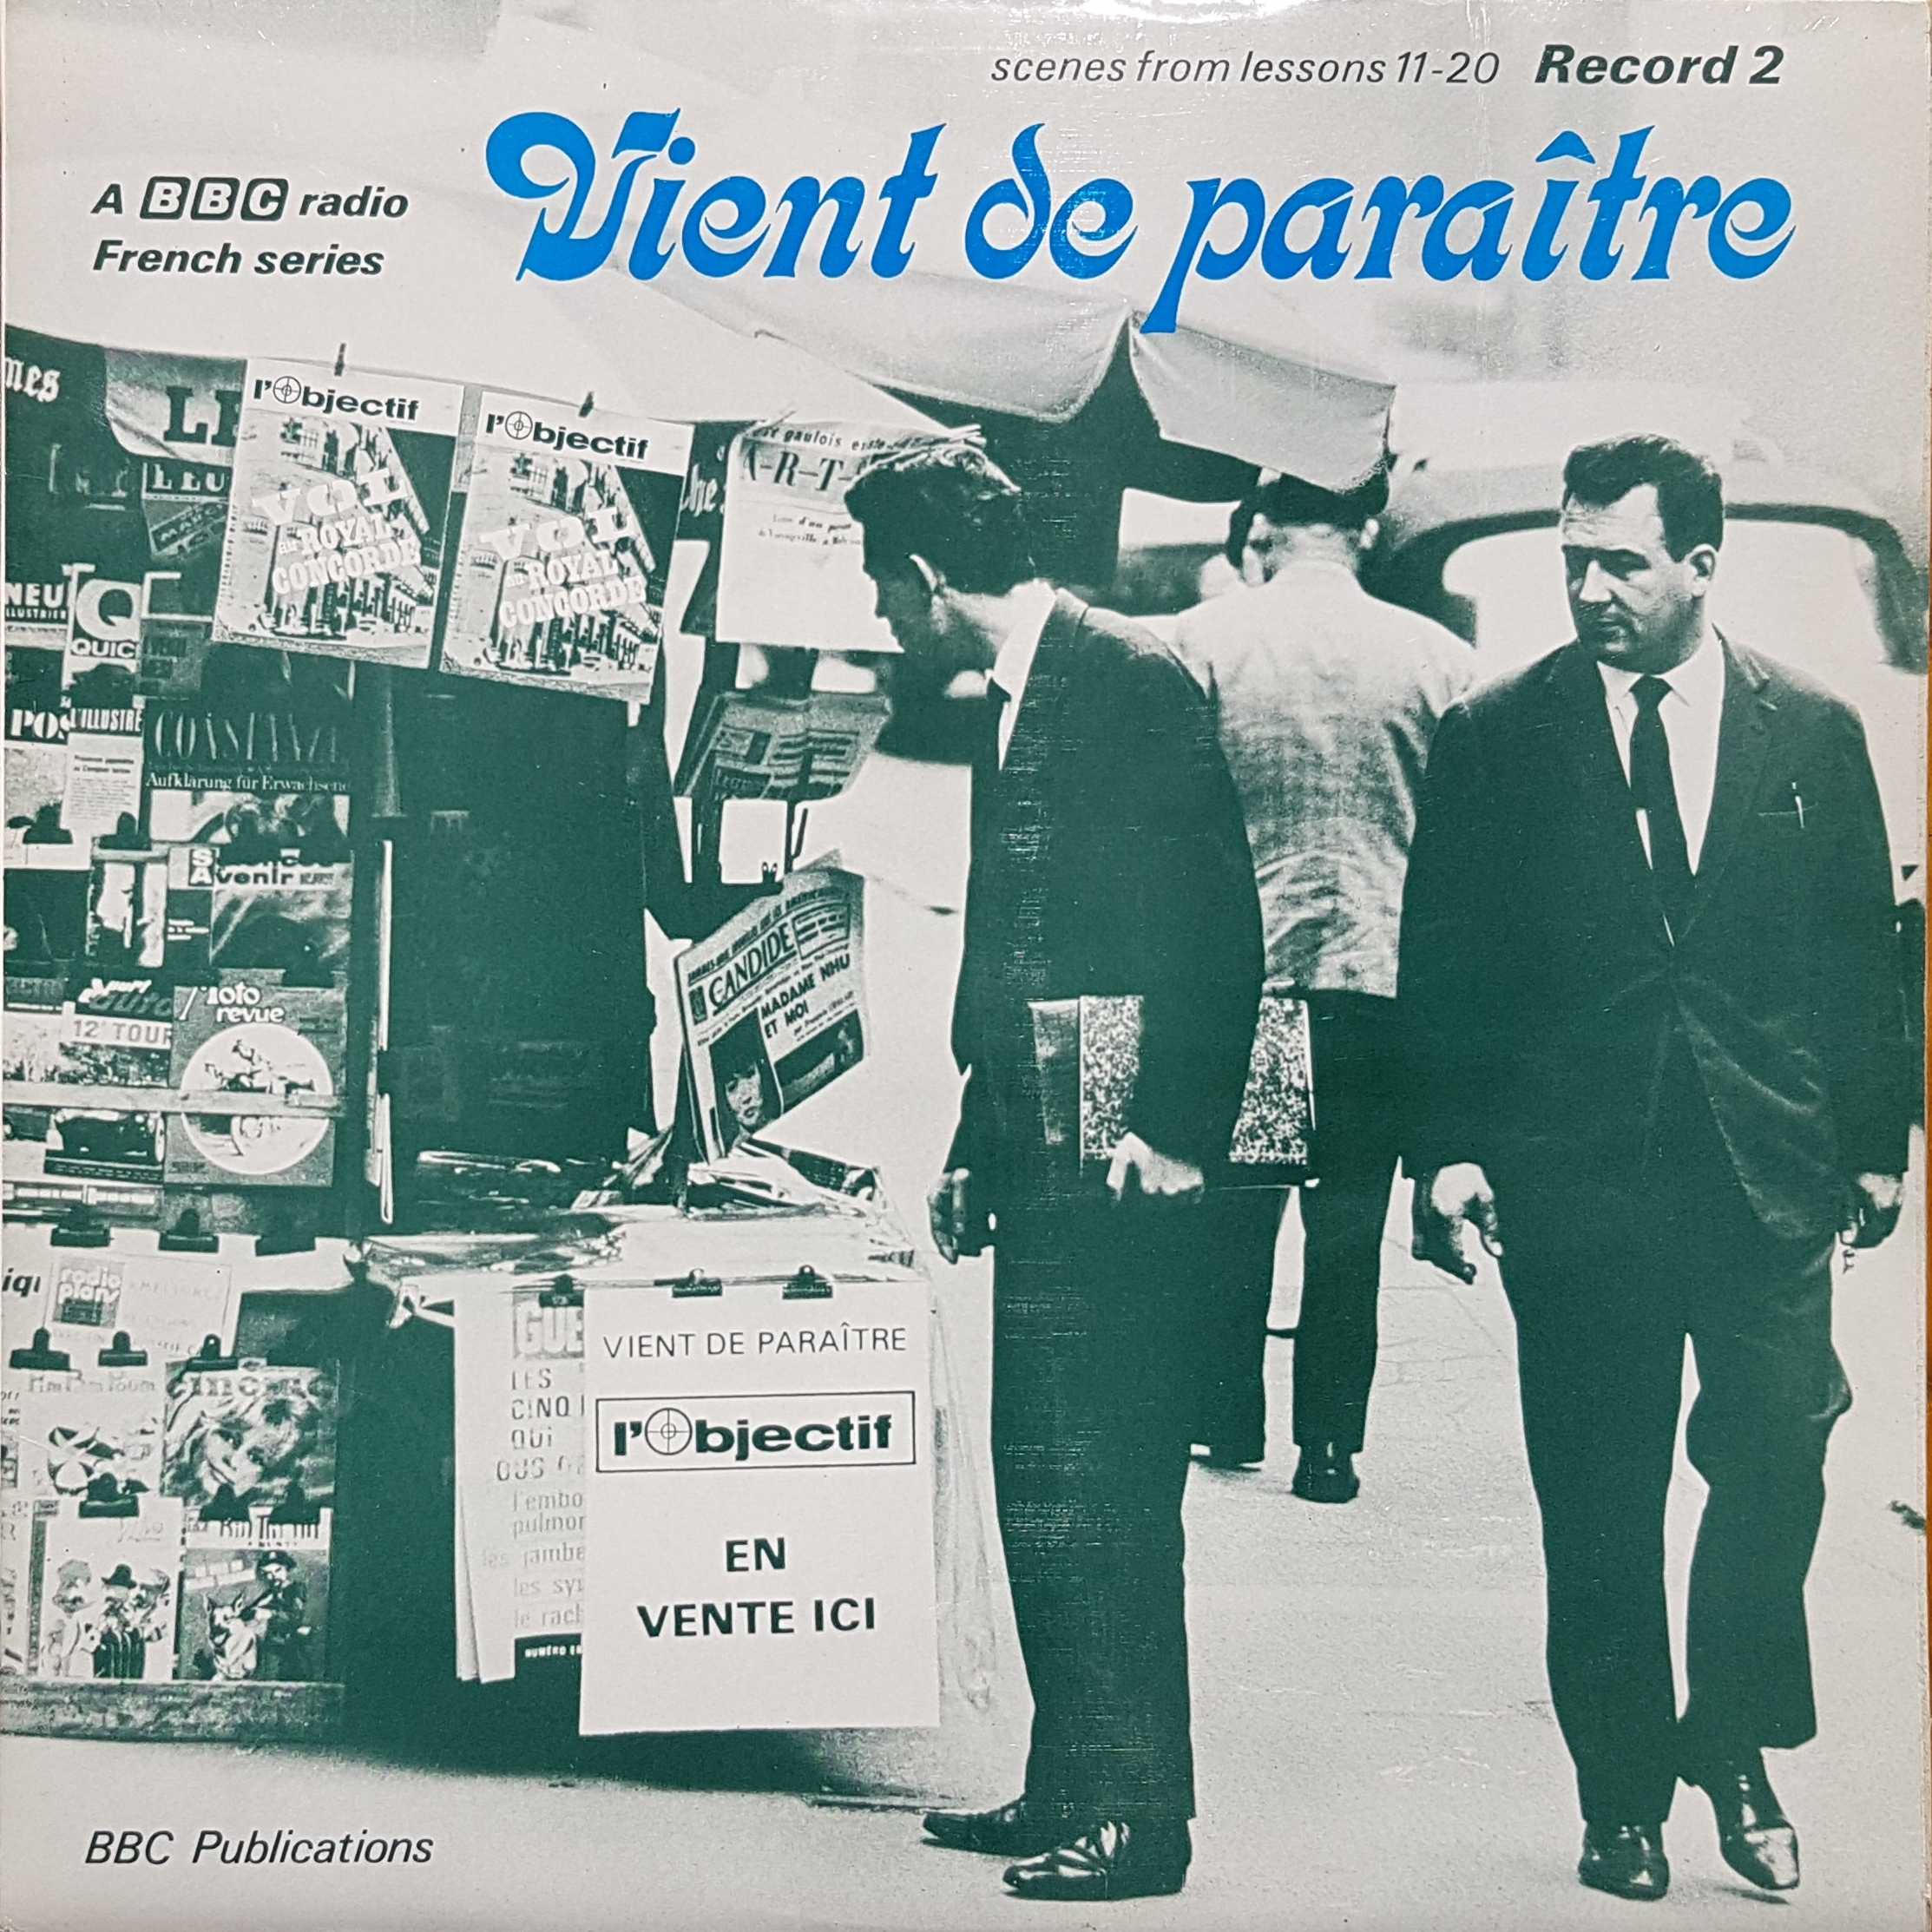 Picture of OP 175/176 Vient de paraitre - A BBC radio French series - Record 2 - Lessons 11 - 20 by artist Richard Martineau from the BBC albums - Records and Tapes library